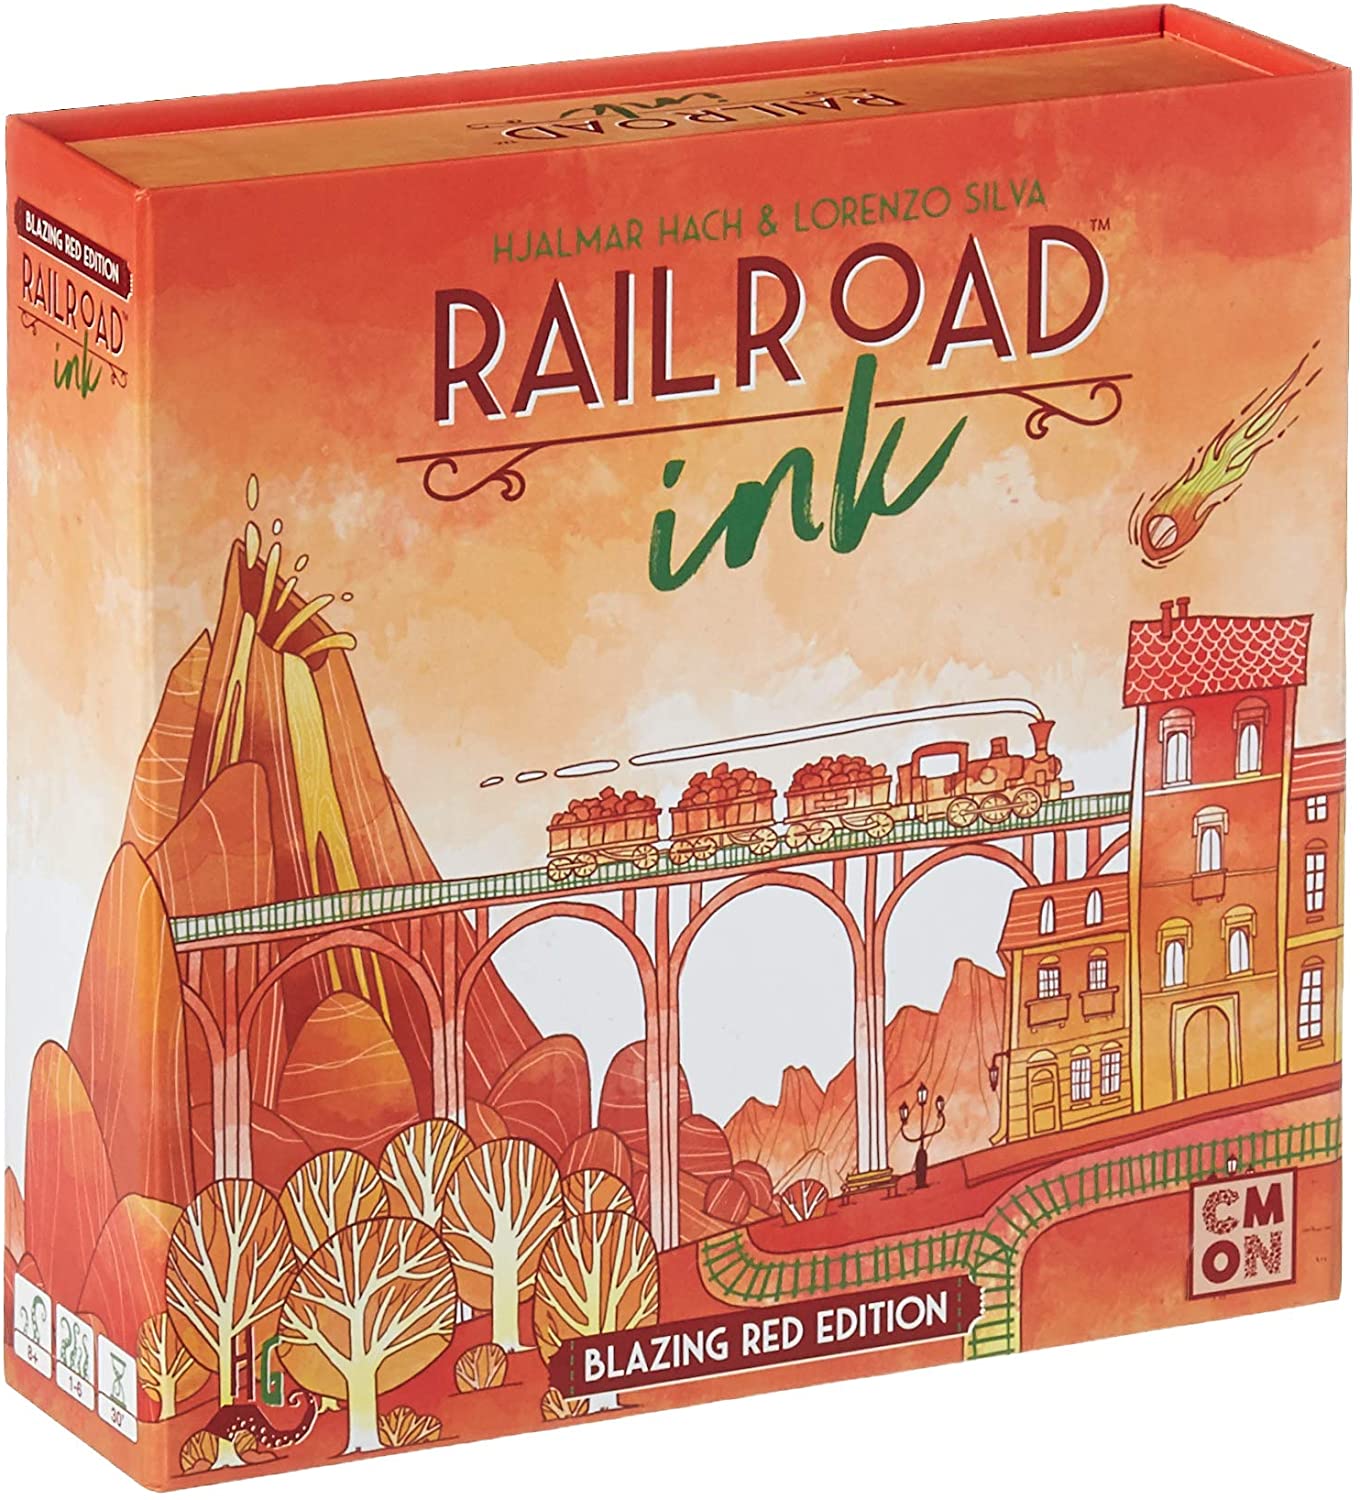 Rail Road Ink Blazing Red Edition Board Game CoolMiniOrNot 